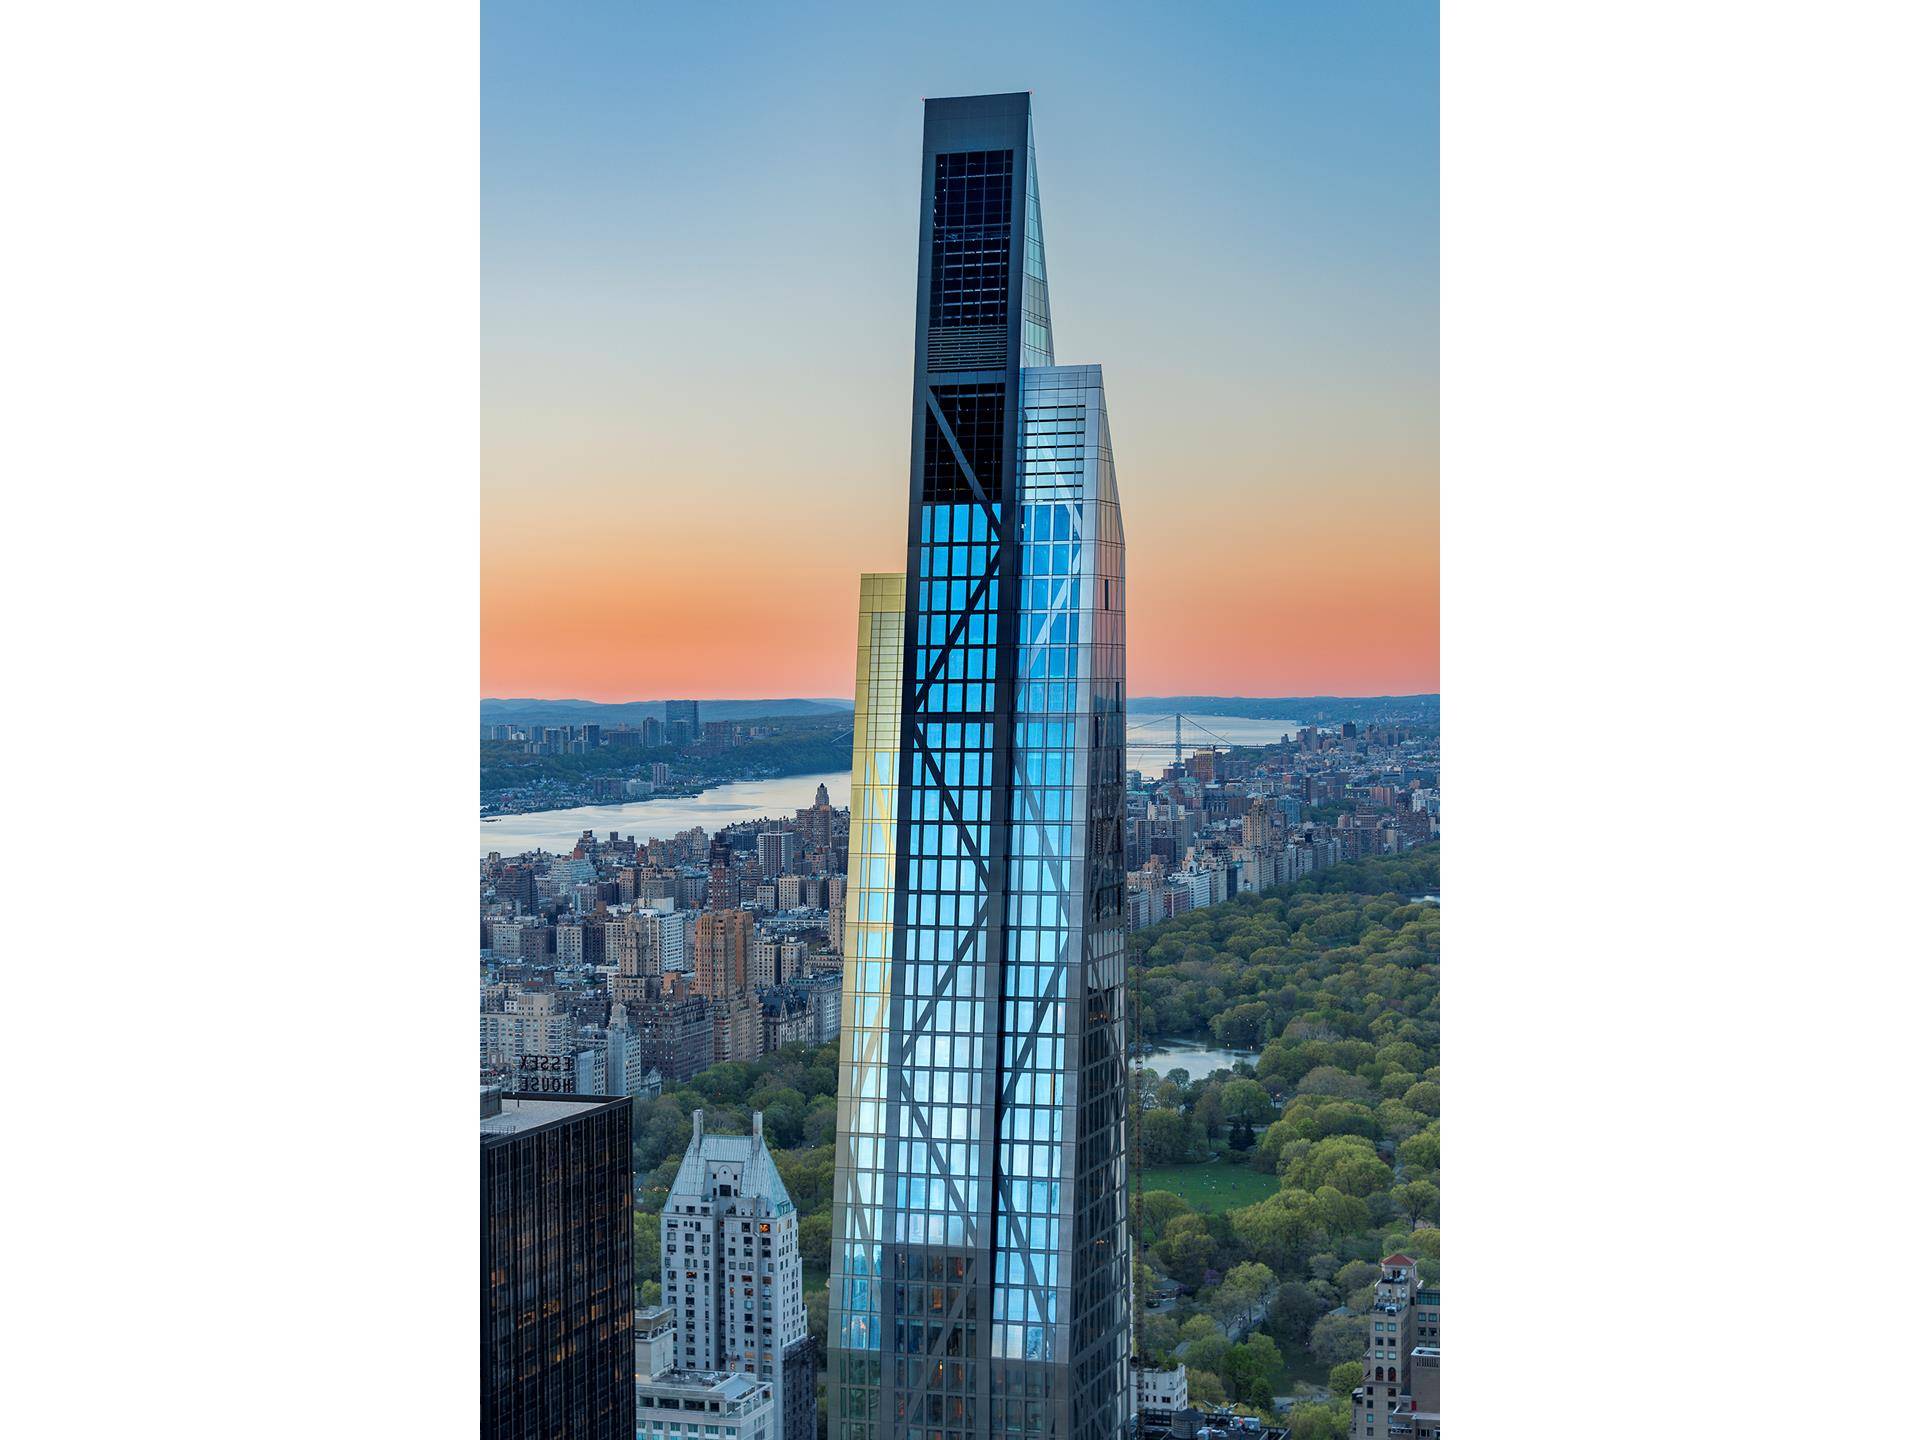 Comprising the entire 63rd floor at 53 West 53, this palatial residence features four bedrooms, four and a half bathrooms, and north, south, east, and west facing exposures.